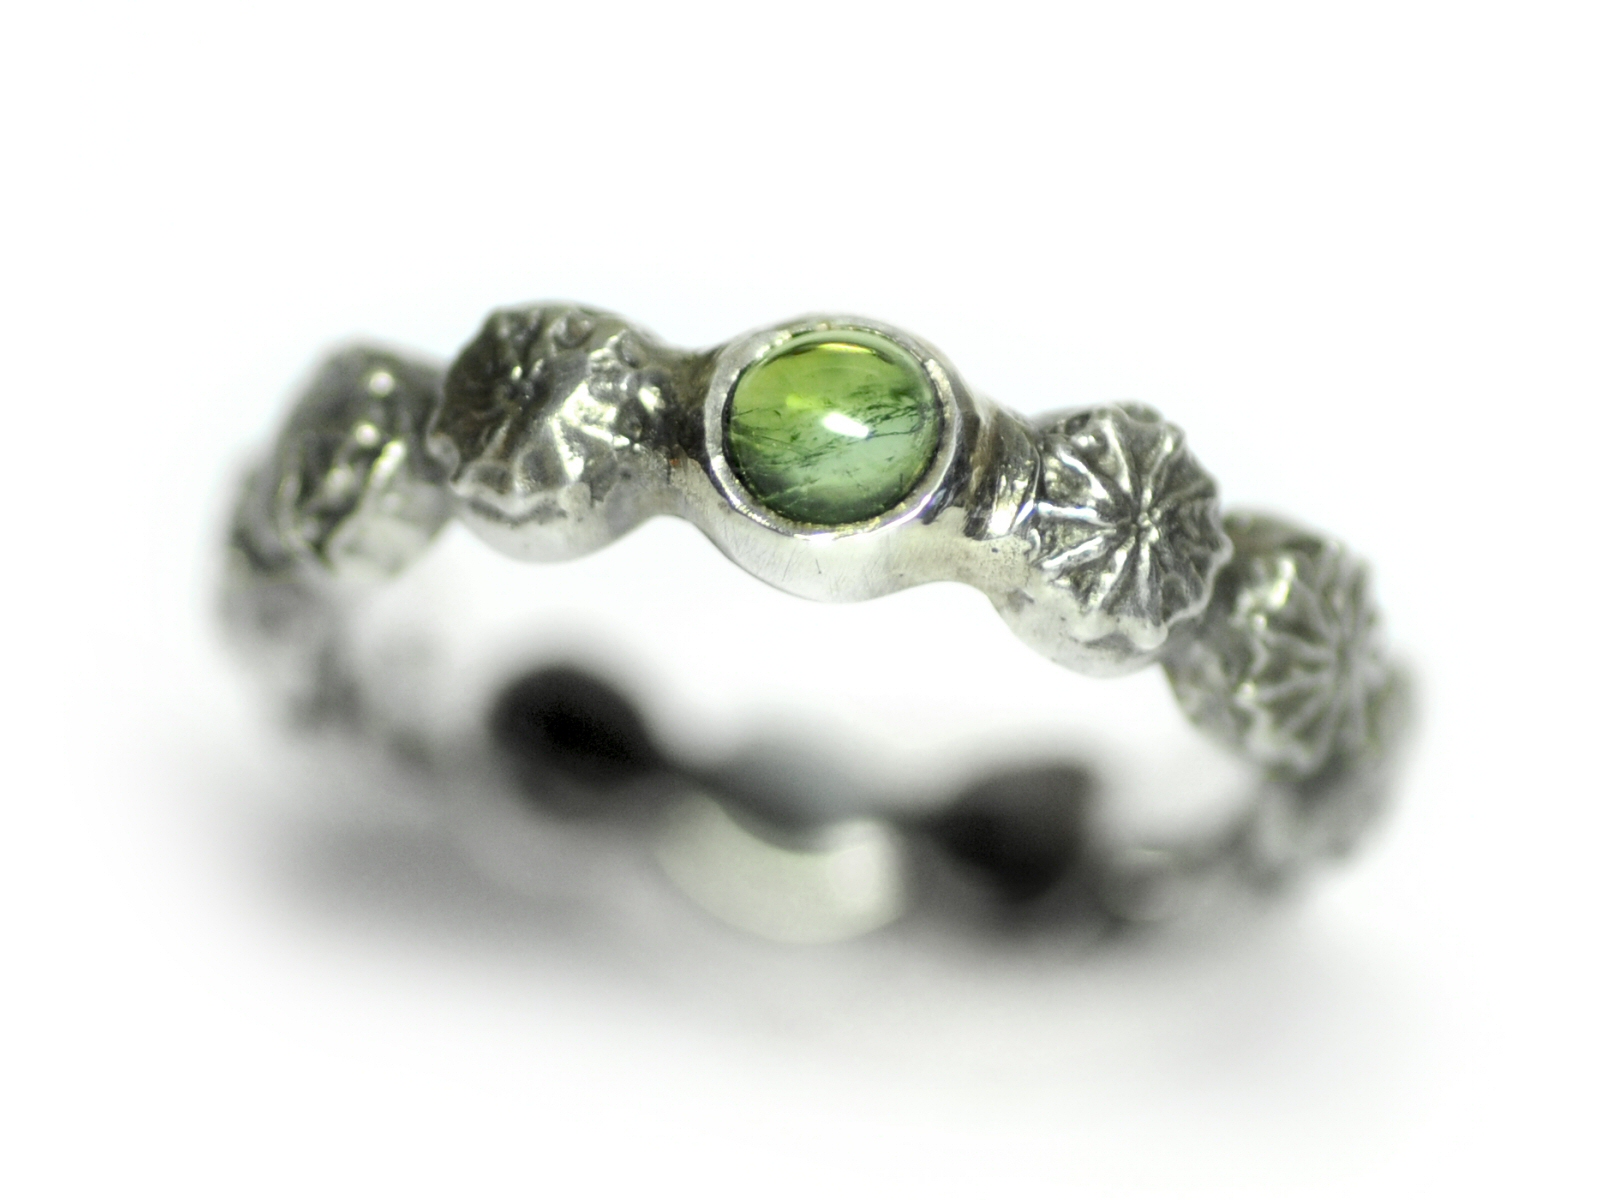 Poppy Seed Head Ring with Green Tourmaline 